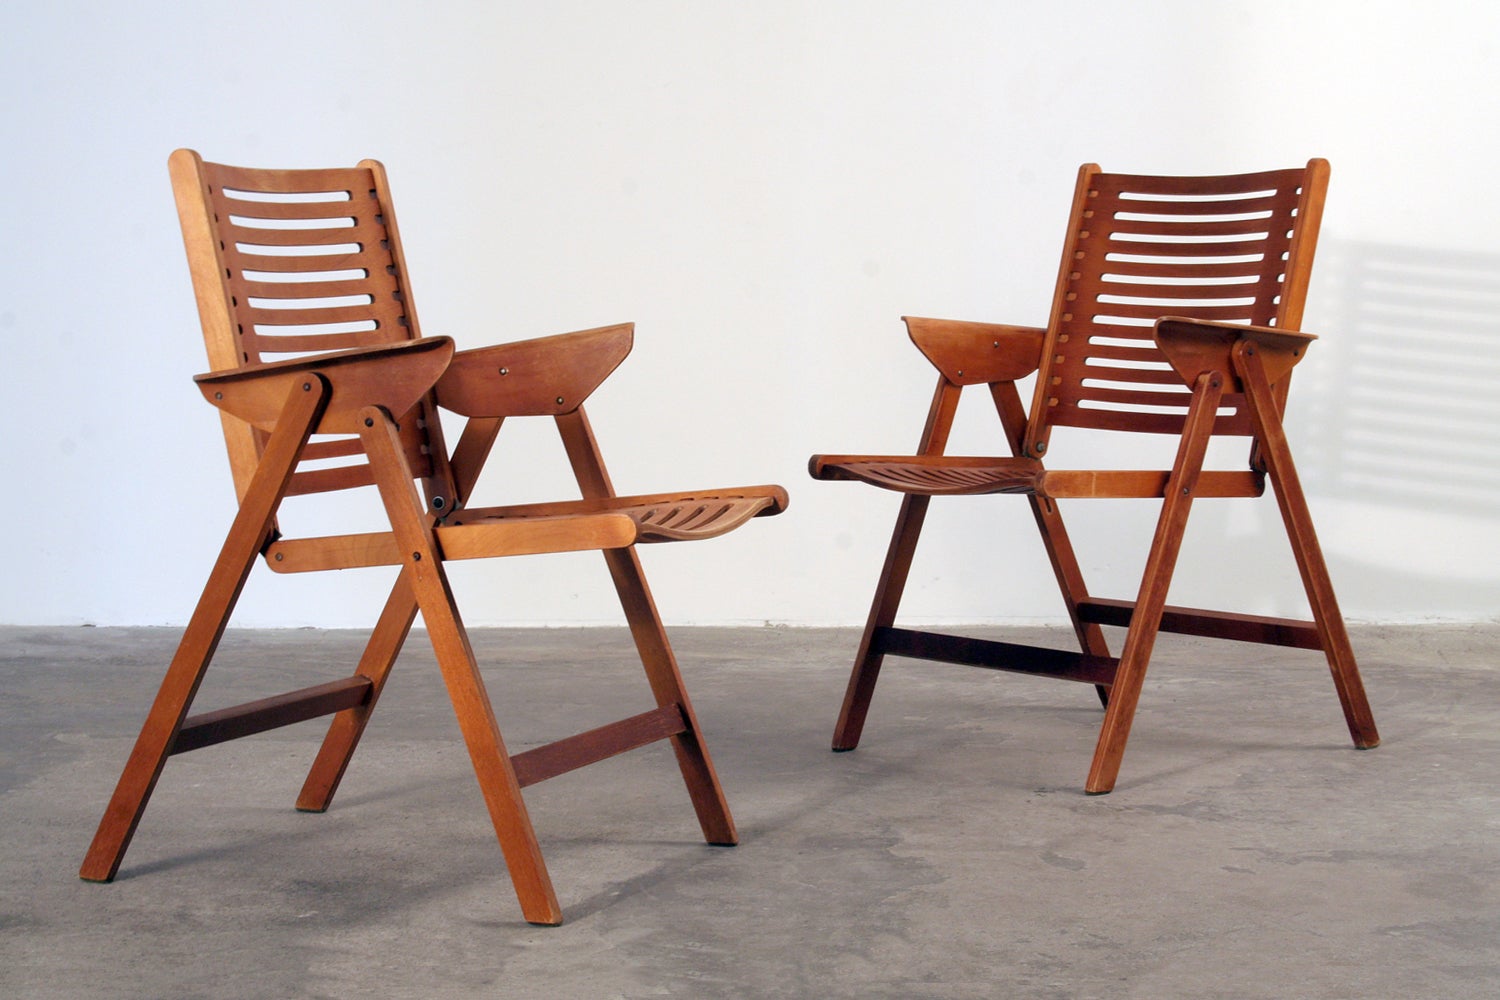 Pair of Nico Kralj Wooden Folding Chairs "Rex Chair" For Sale